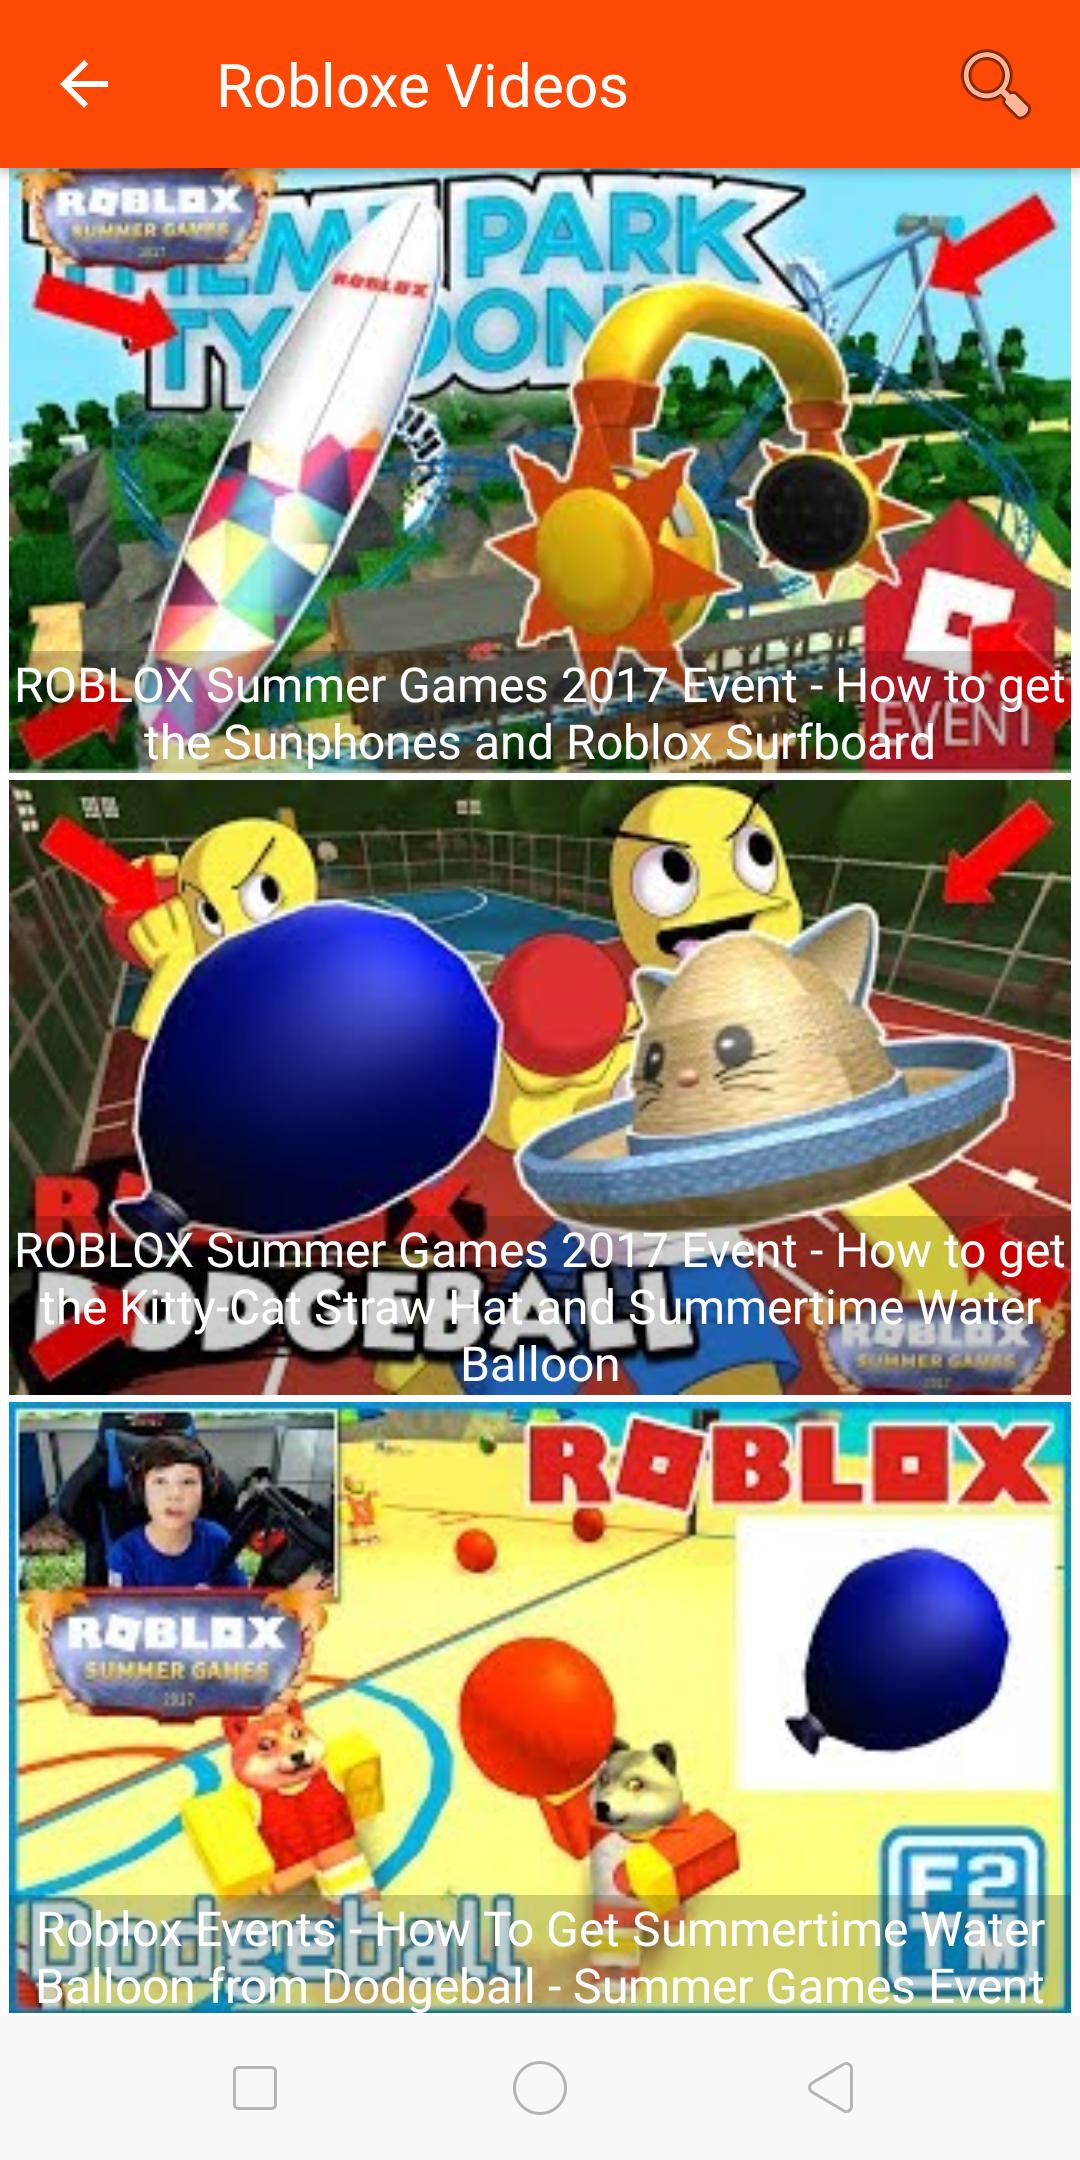 Roblox Events Innovation